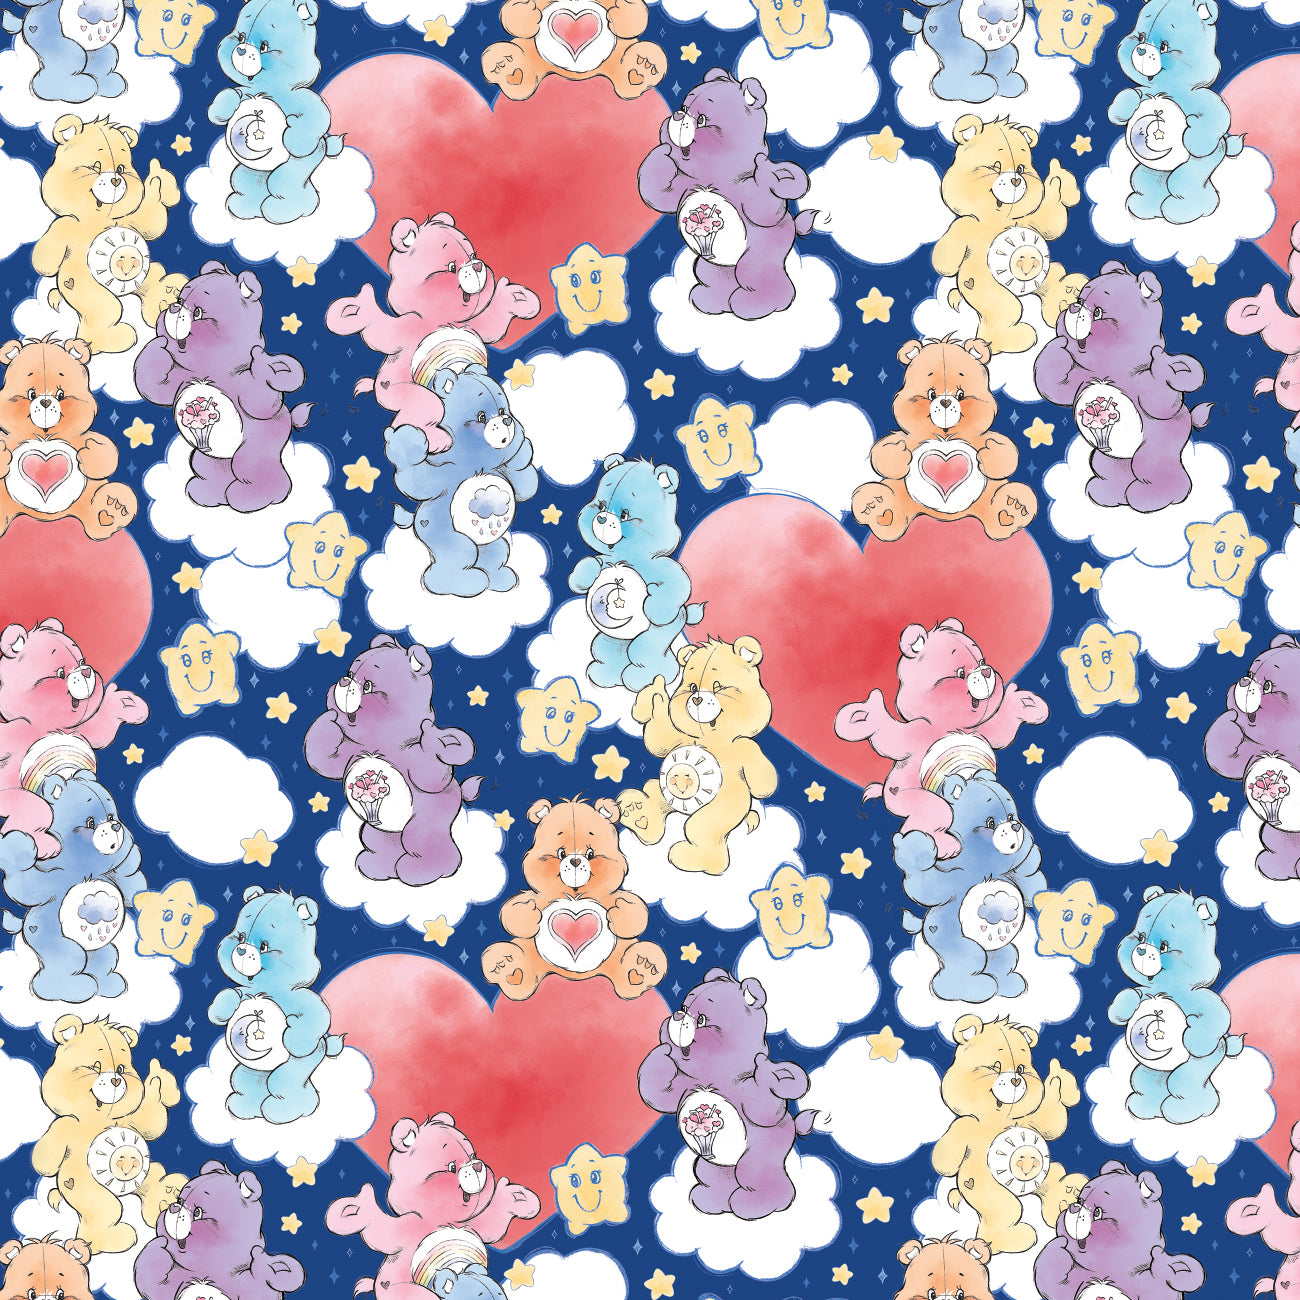 Care Bears Sketch Art Collection-Sketched Care Bears Hearts-Navy-100% Cotton-44011004-05